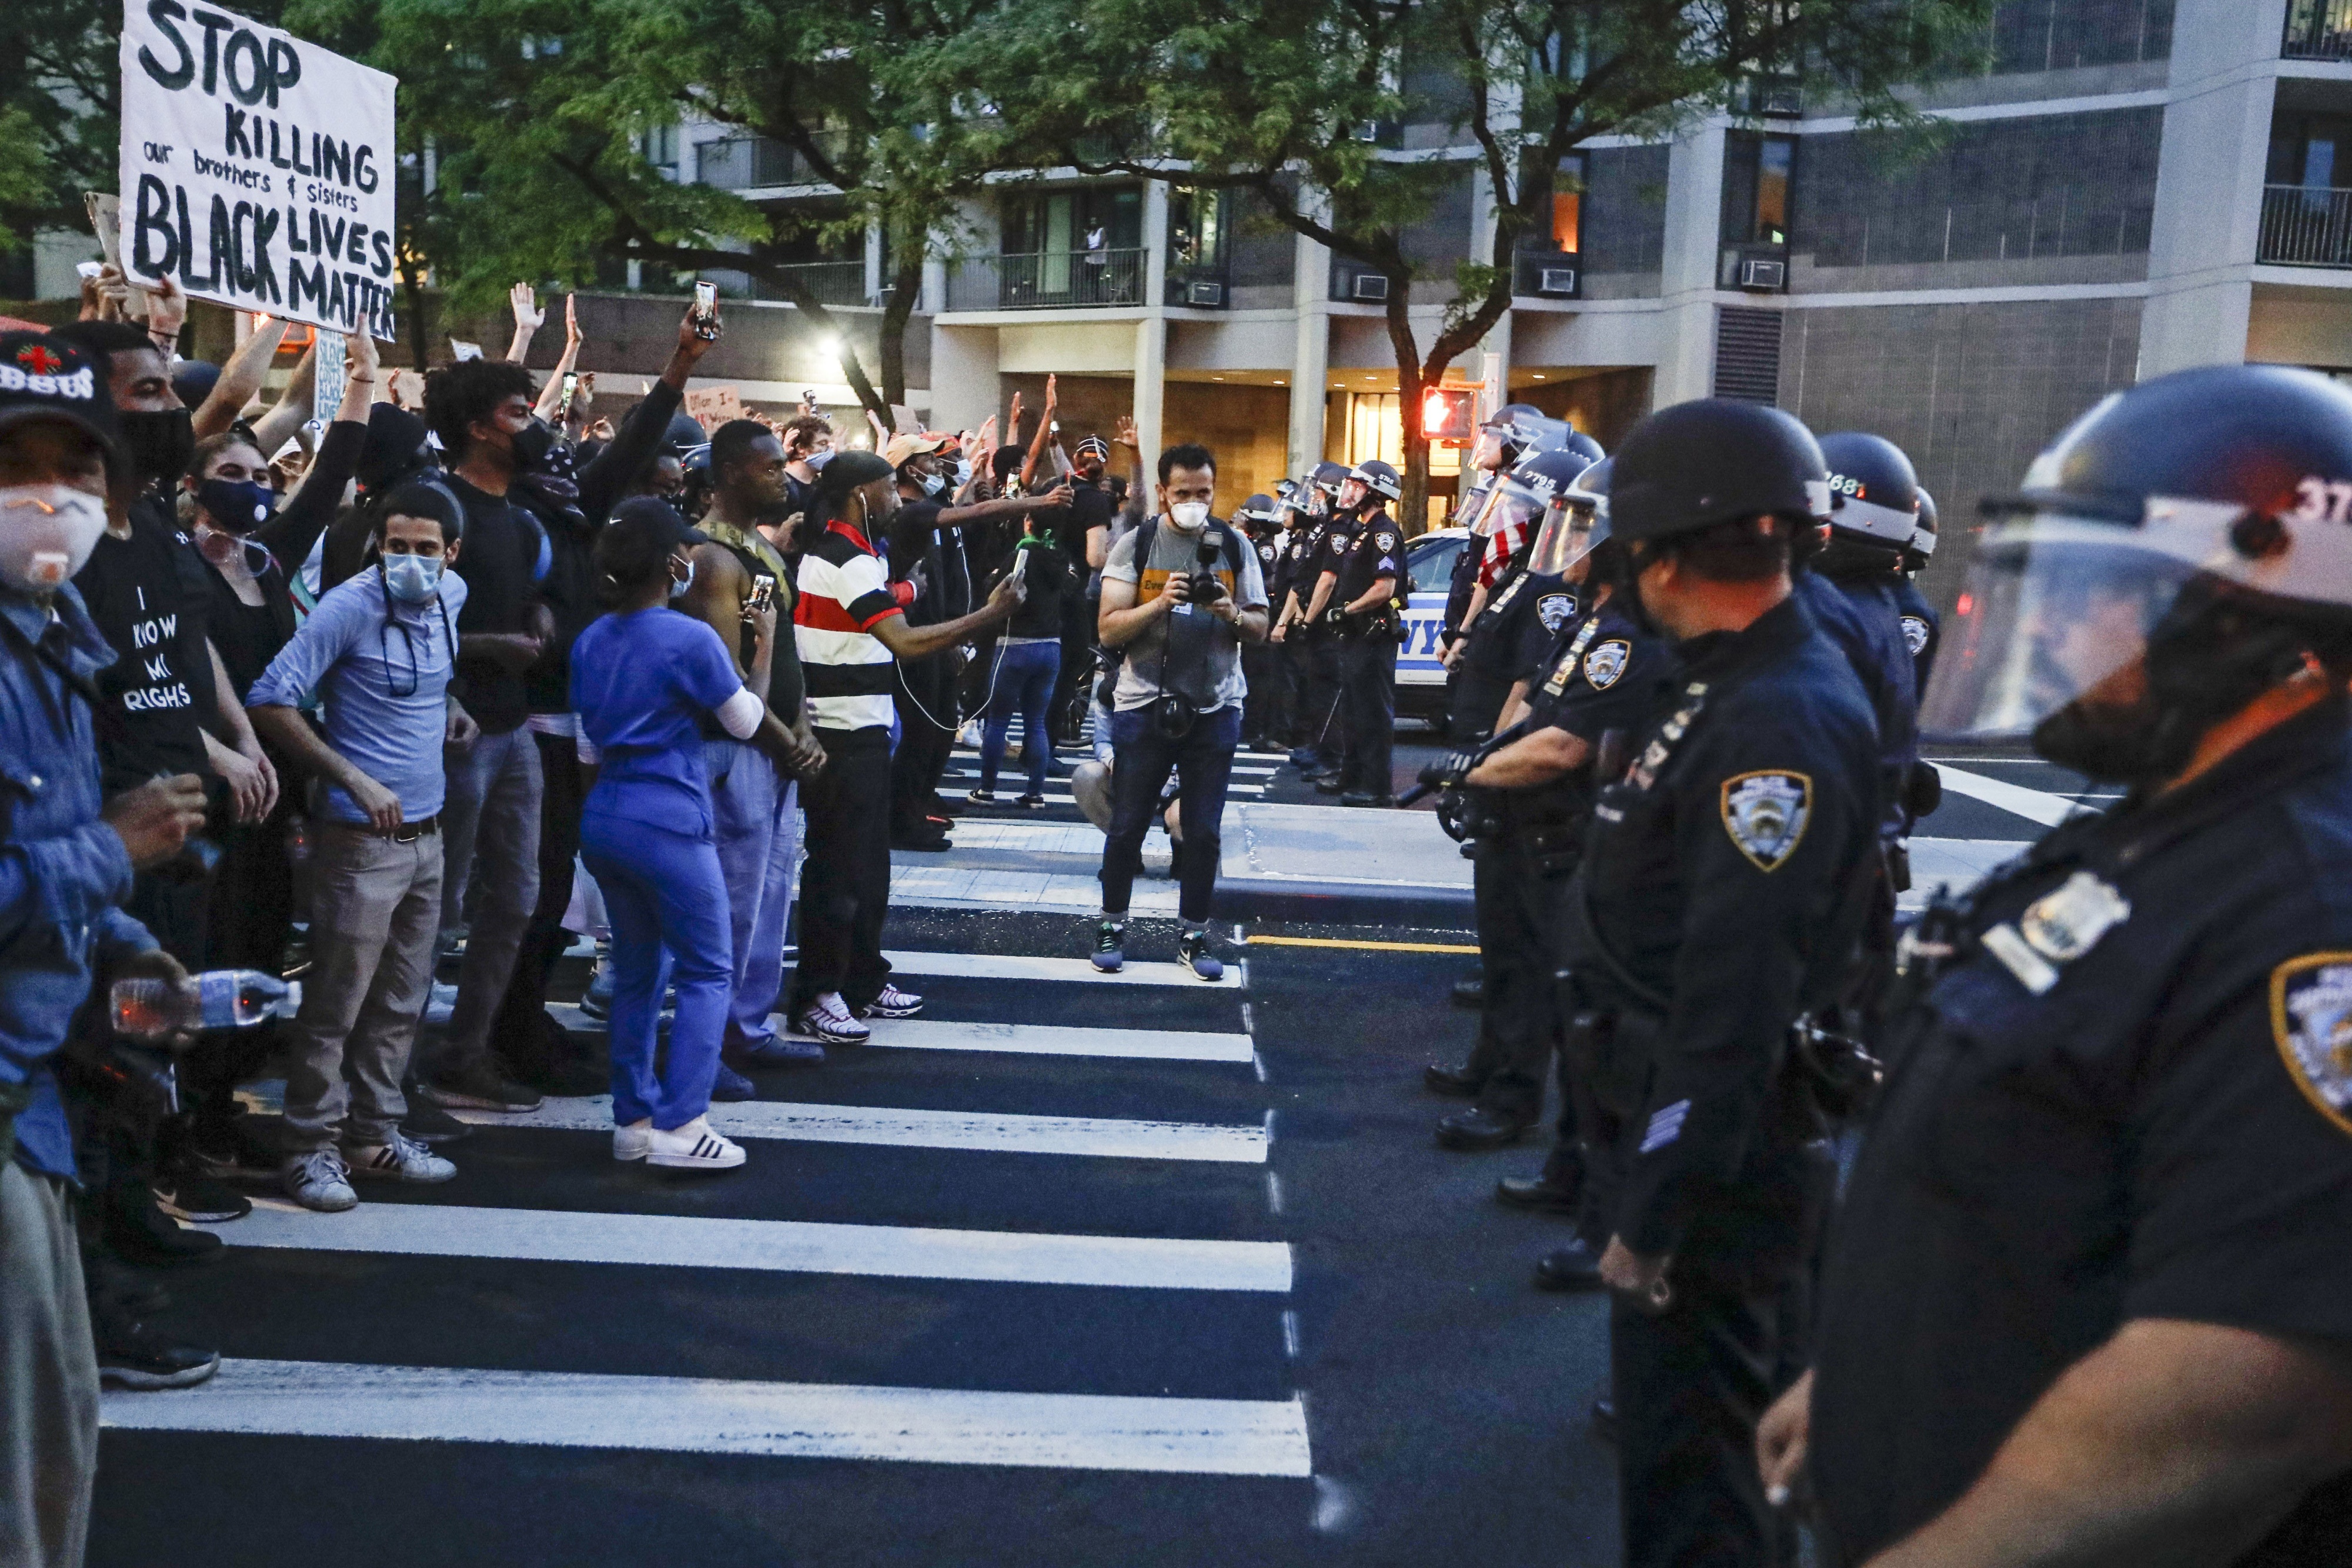 Protesters confront New York Police officers as part of a solidarity rally calling for justice over the death of George Floyd, in the Brooklyn, New York, June 3, 2020. 